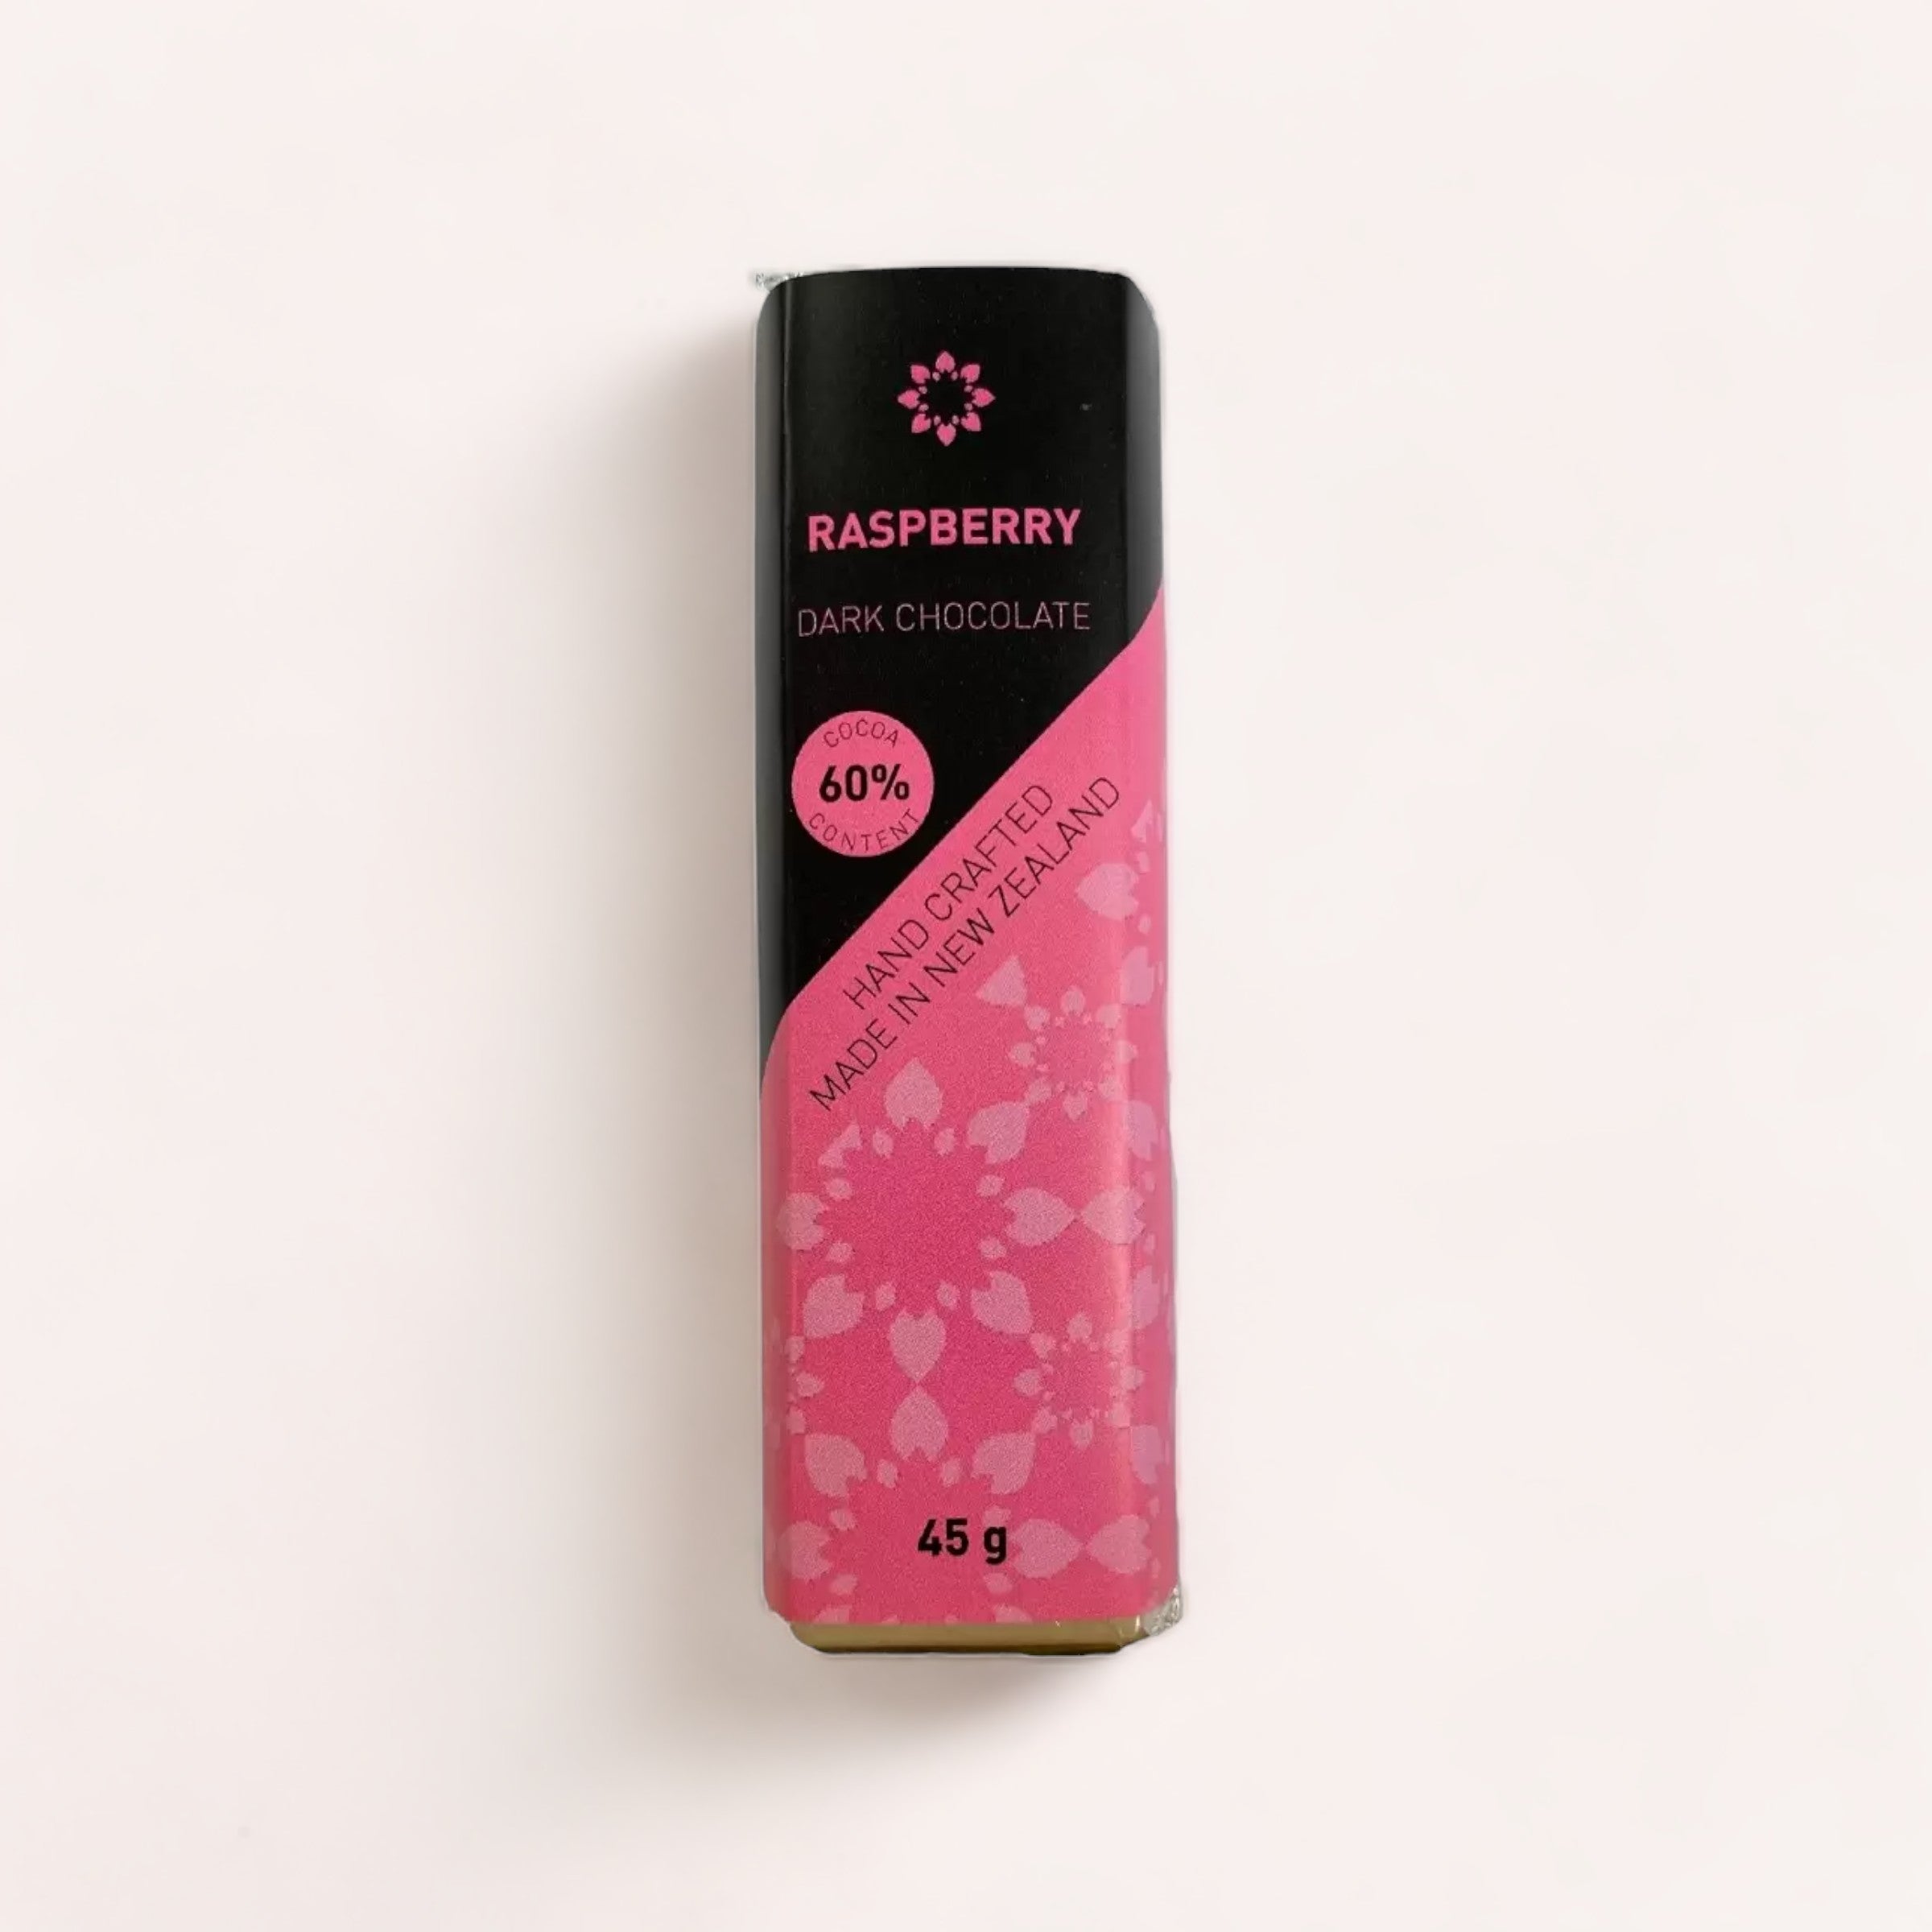 A bar of Raspberry Chocolate bar with 60% cocoa, handcrafted and fair trade, product of New Zealand, weighing 45 grams, wrapped in a packaging with a pink and heart design by Chocolate Traders.